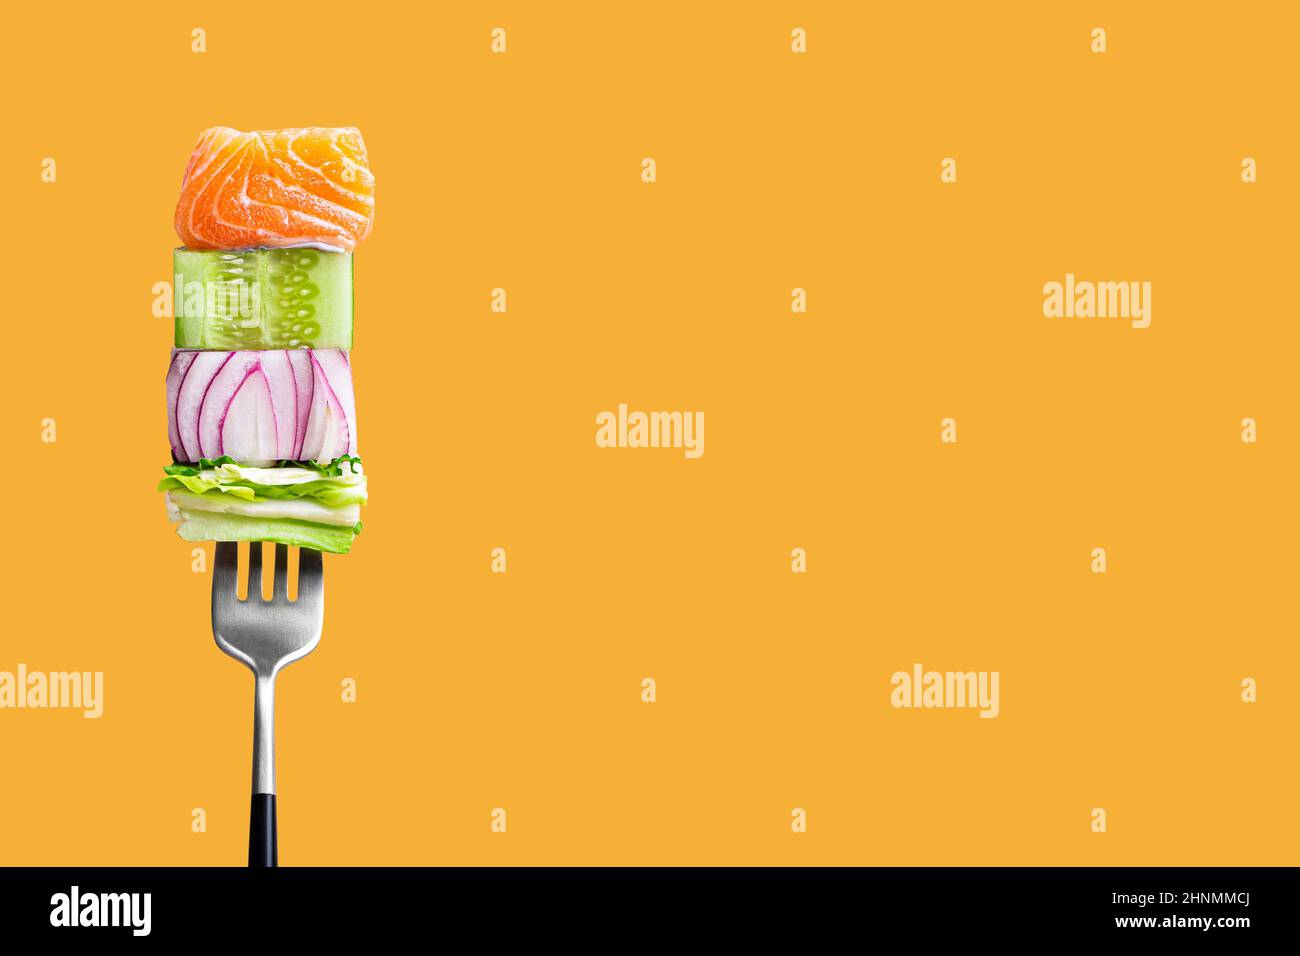 fork with food on it: delicious fillet salmon, cucumber, onion, green salad on orange background Stock Photo